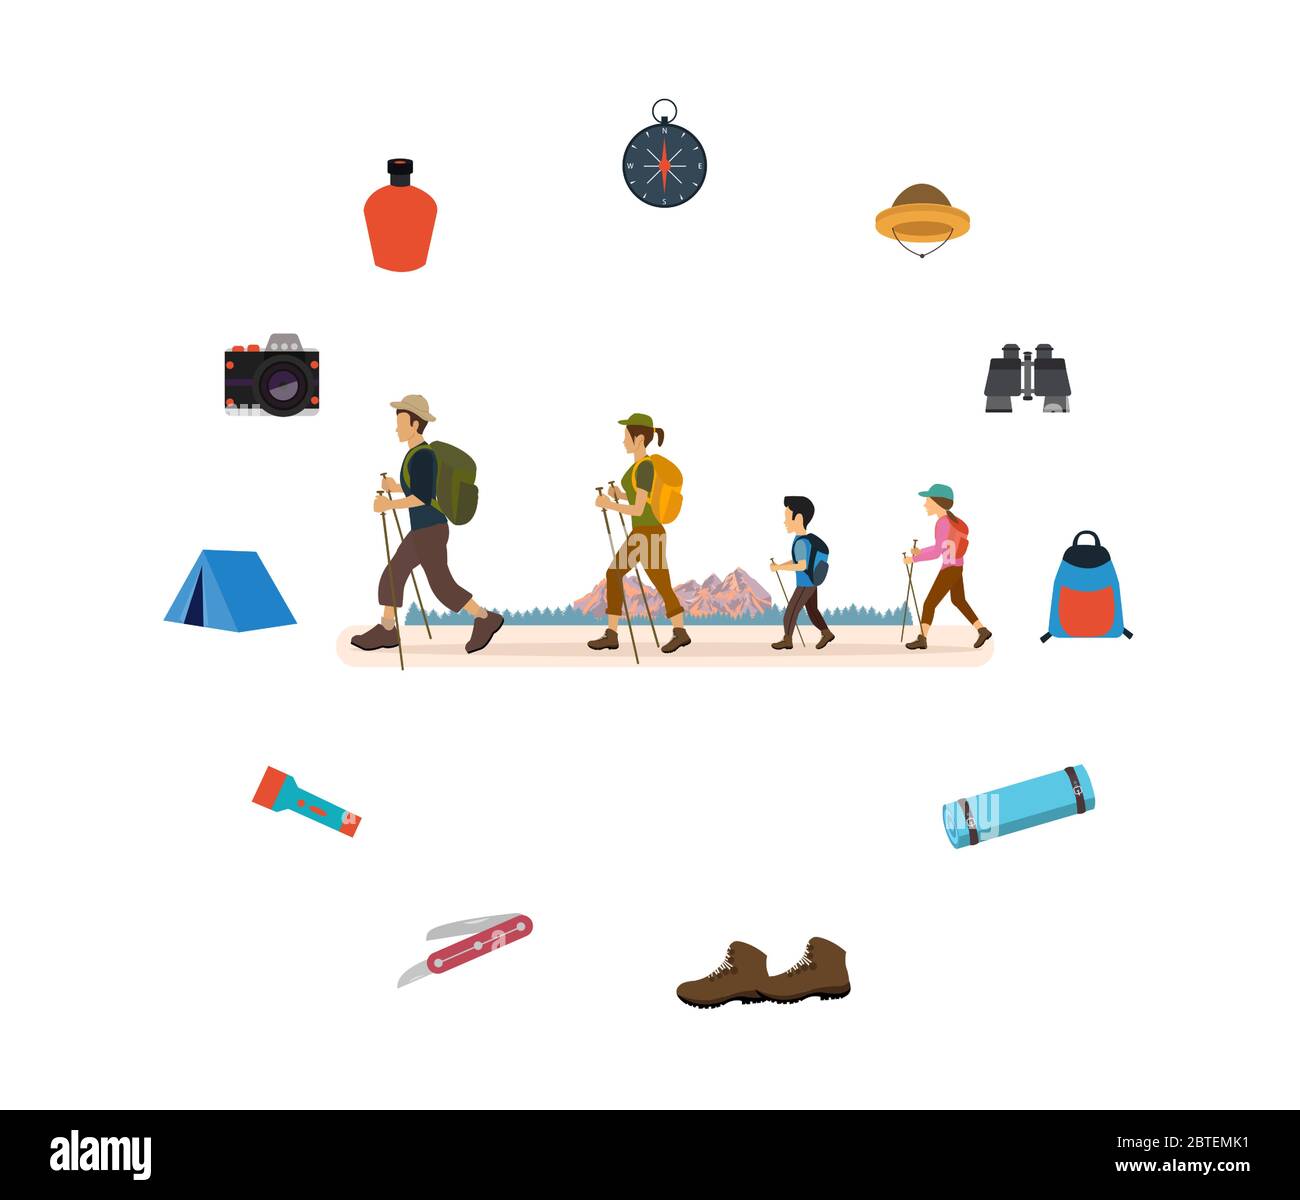 Vector of a young family man,woman and children hiking outdoors using trekking gear Stock Vector